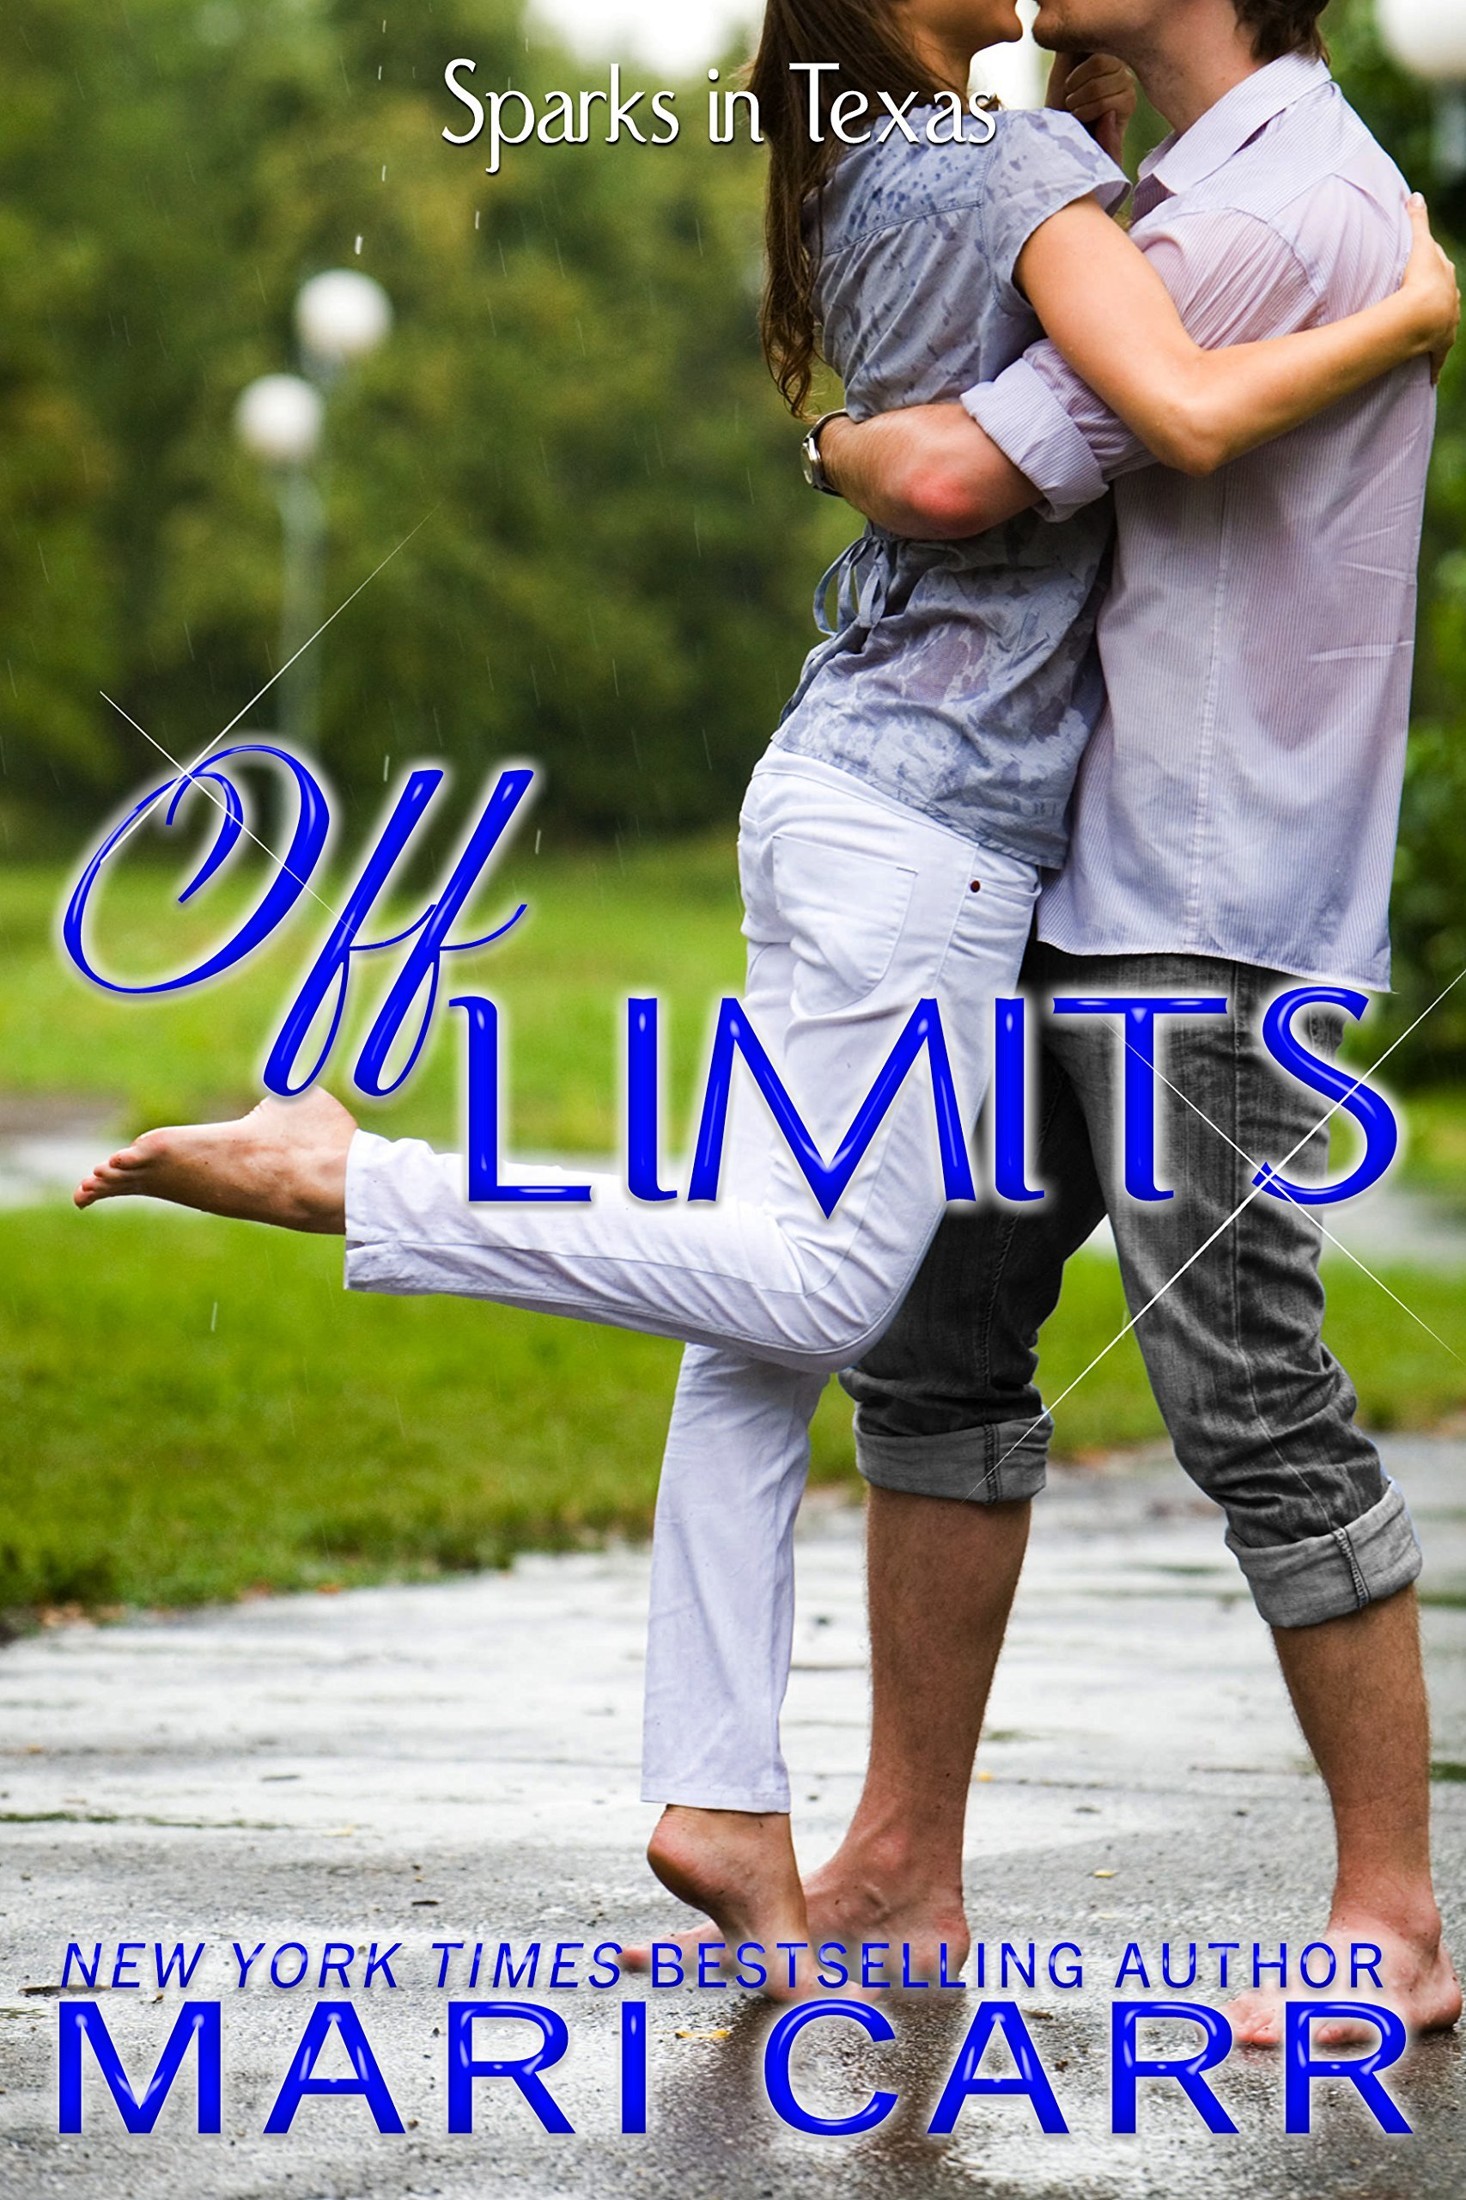 Off Limits (Sparks in Texas Book 4) by Mari Carr